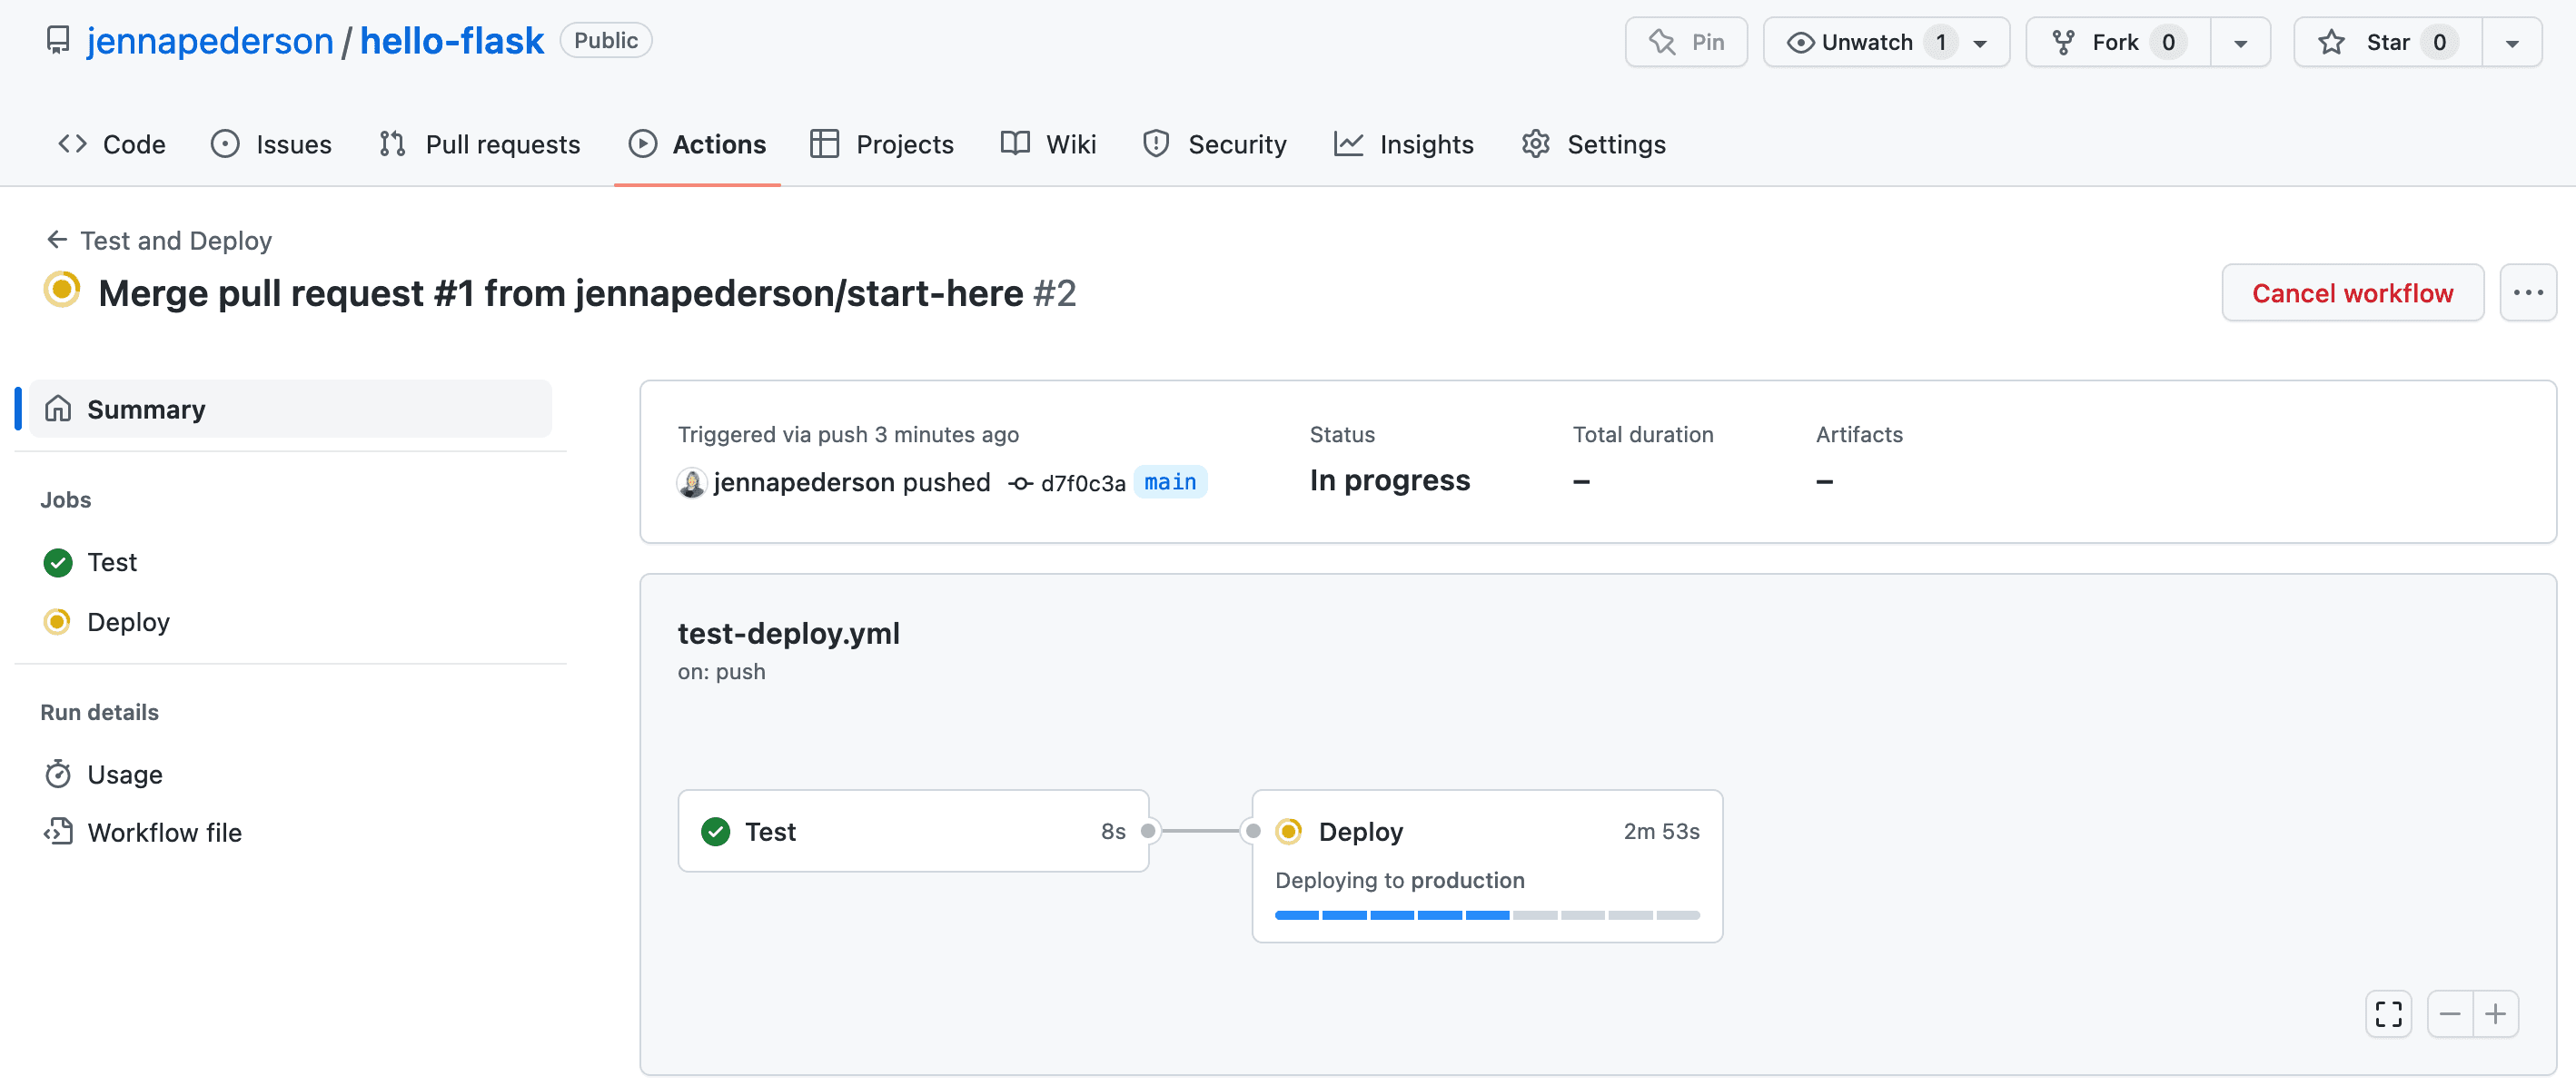 Shows the Actions tab of the  GitHub repo and the details page of the running workflow, where the Test job has completed successfully and the Deploy job is in progress